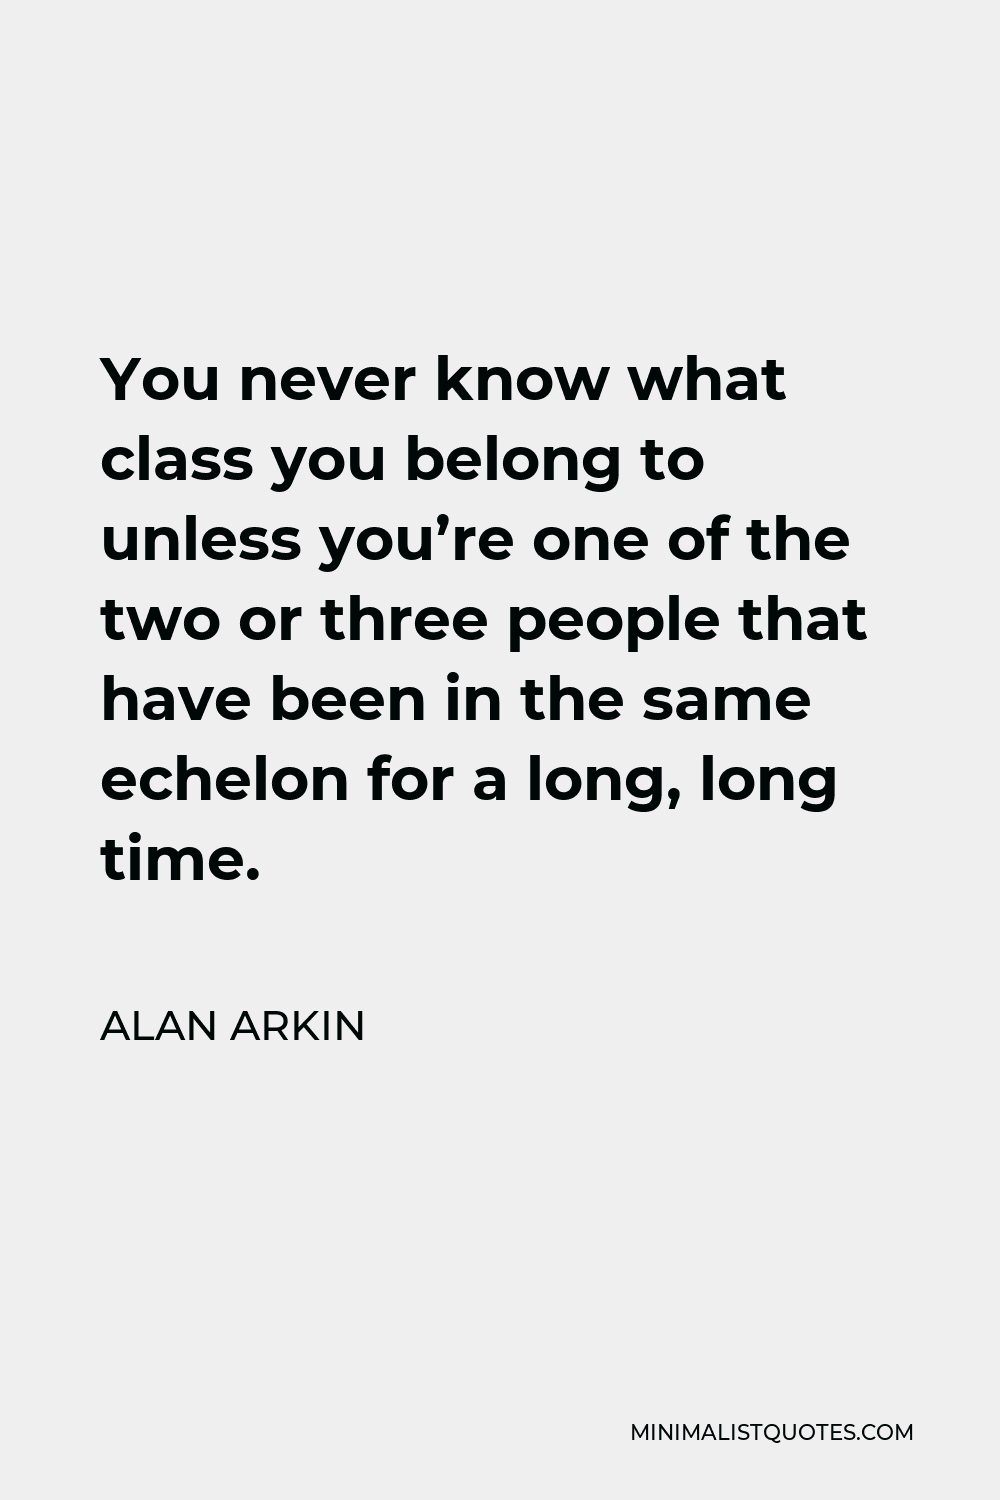 Alan Arkin Quote - You never know what class you belong to unless you’re one of the two or three people that have been in the same echelon for a long, long time.